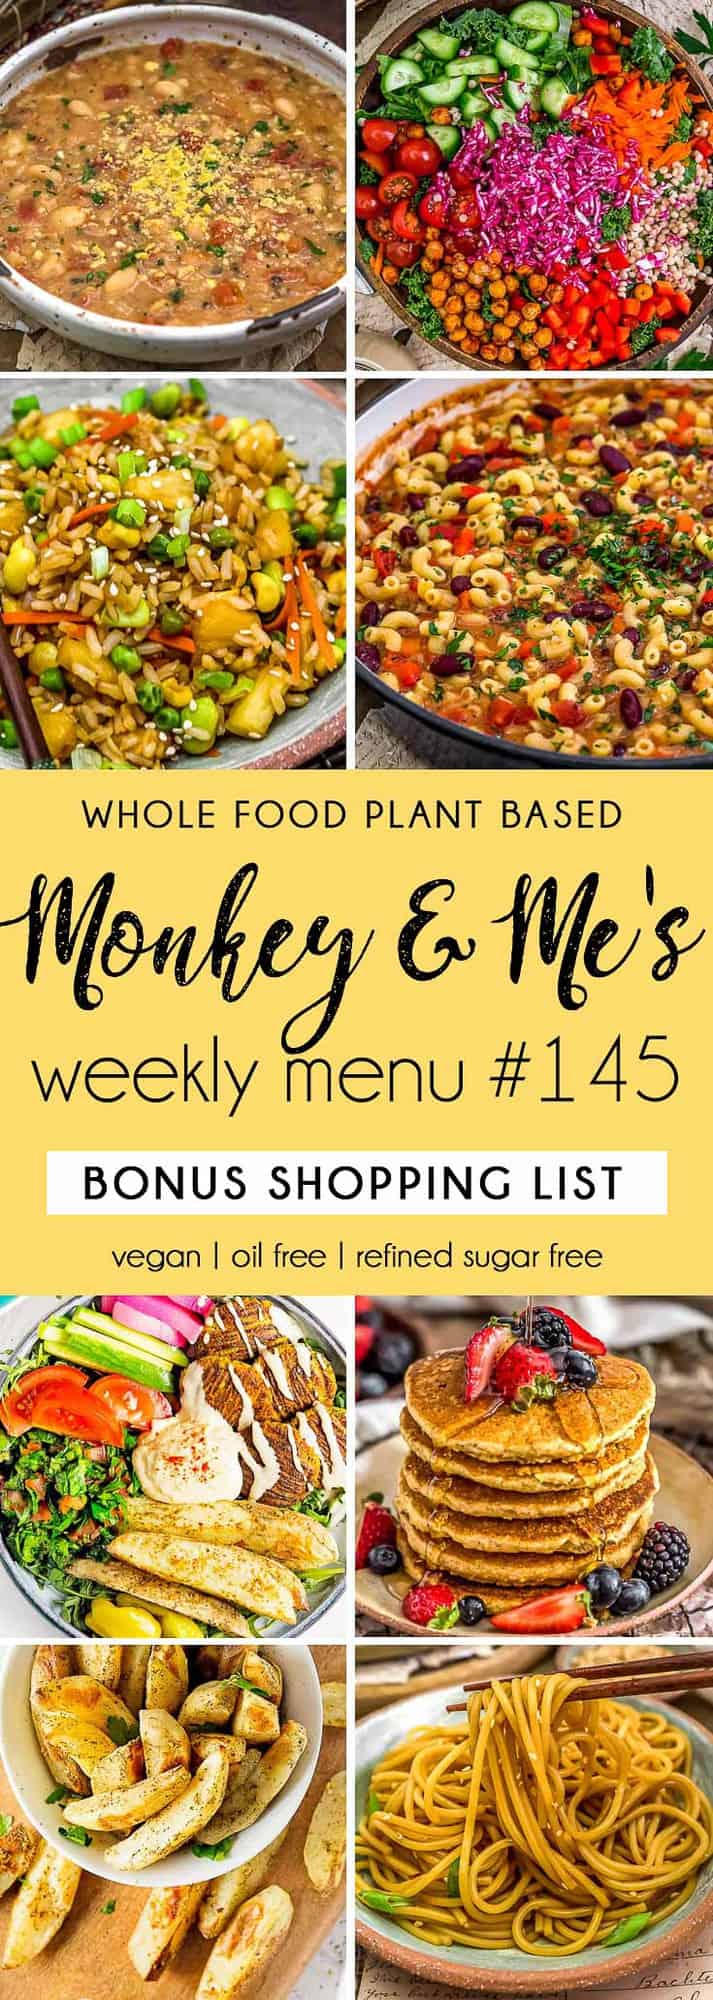 Monkey and Me's Menu 145 featuring 8 recipes